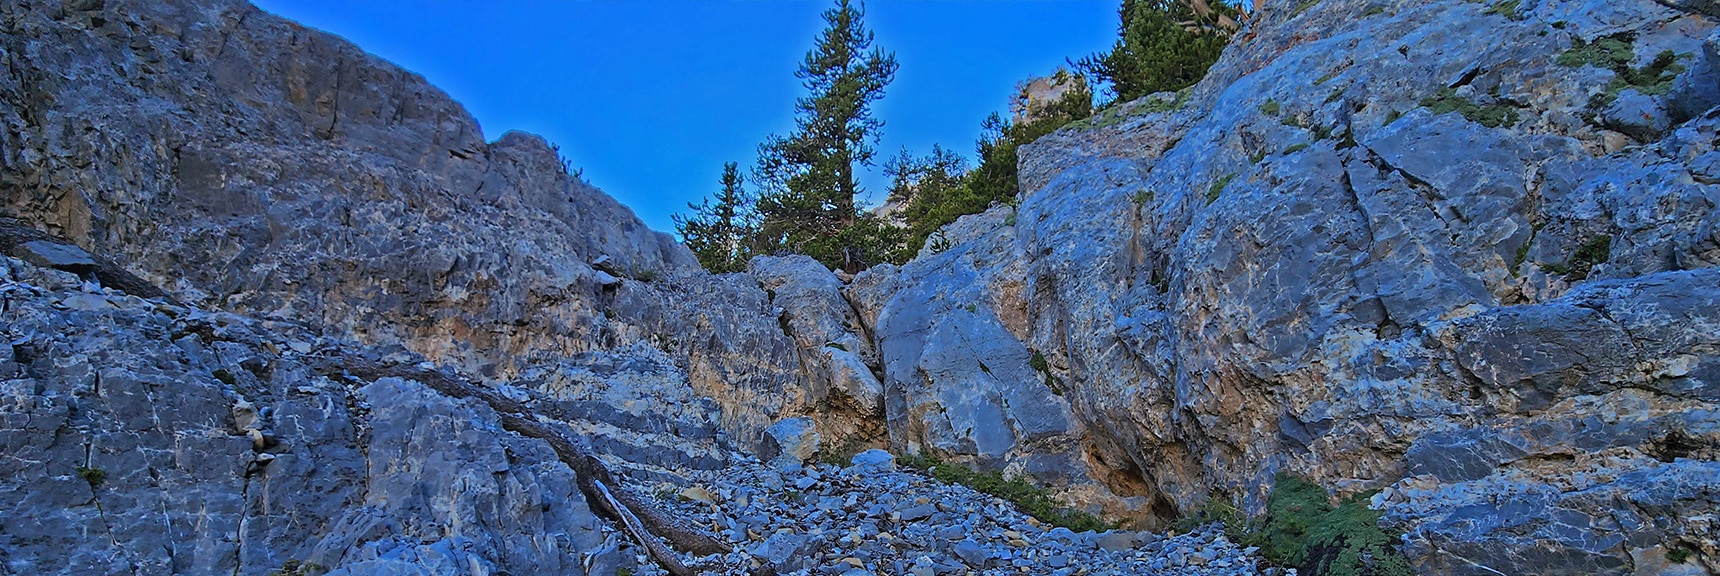 View Up Final Channel Below Steepest Portion of Descent Chute | Mummy Mountain Grand Crossing | Lee Canyon to Deer Creek Road | Mt Charleston Wilderness | Spring Mountains, Nevada |